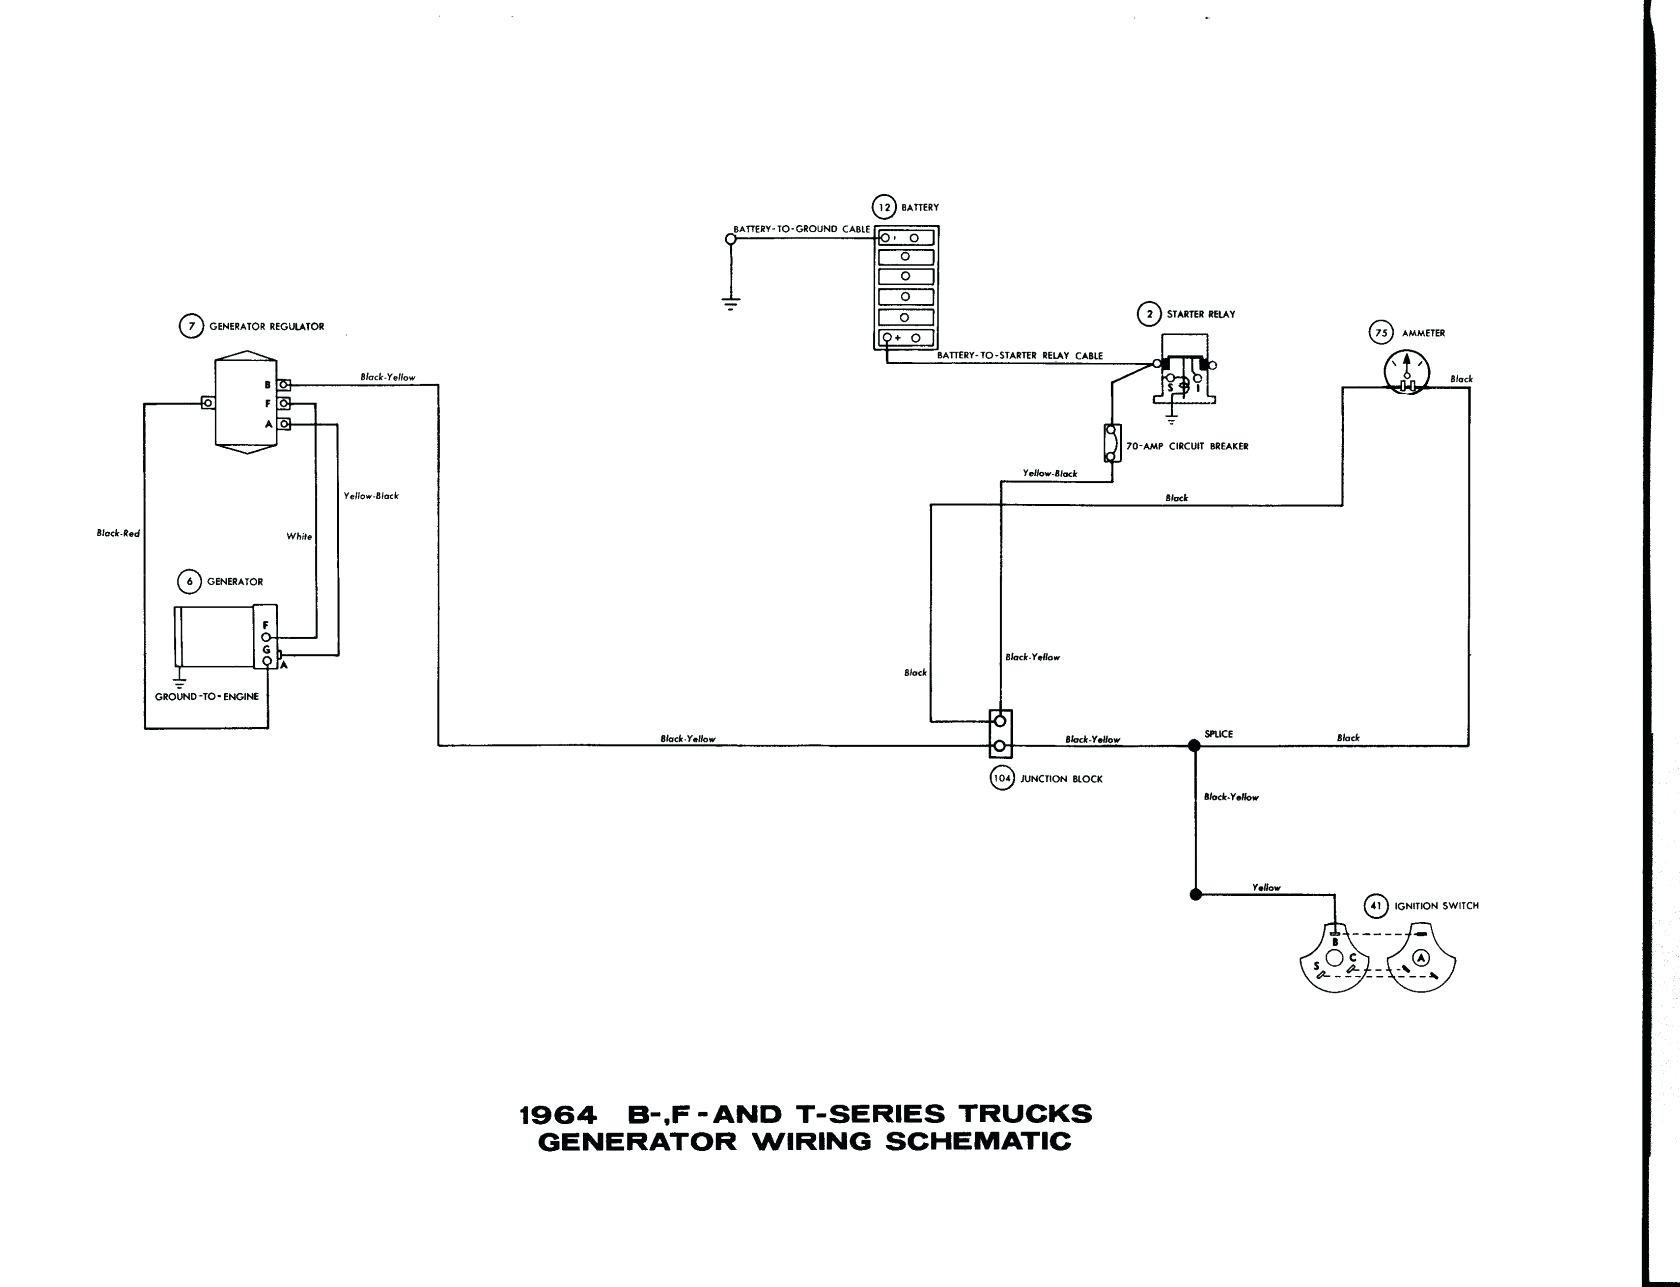 Wiring Diagram for Gm Ignition Switch New Gm Starter solenoid Wiring Diagram Unique Ignition Switch Inside